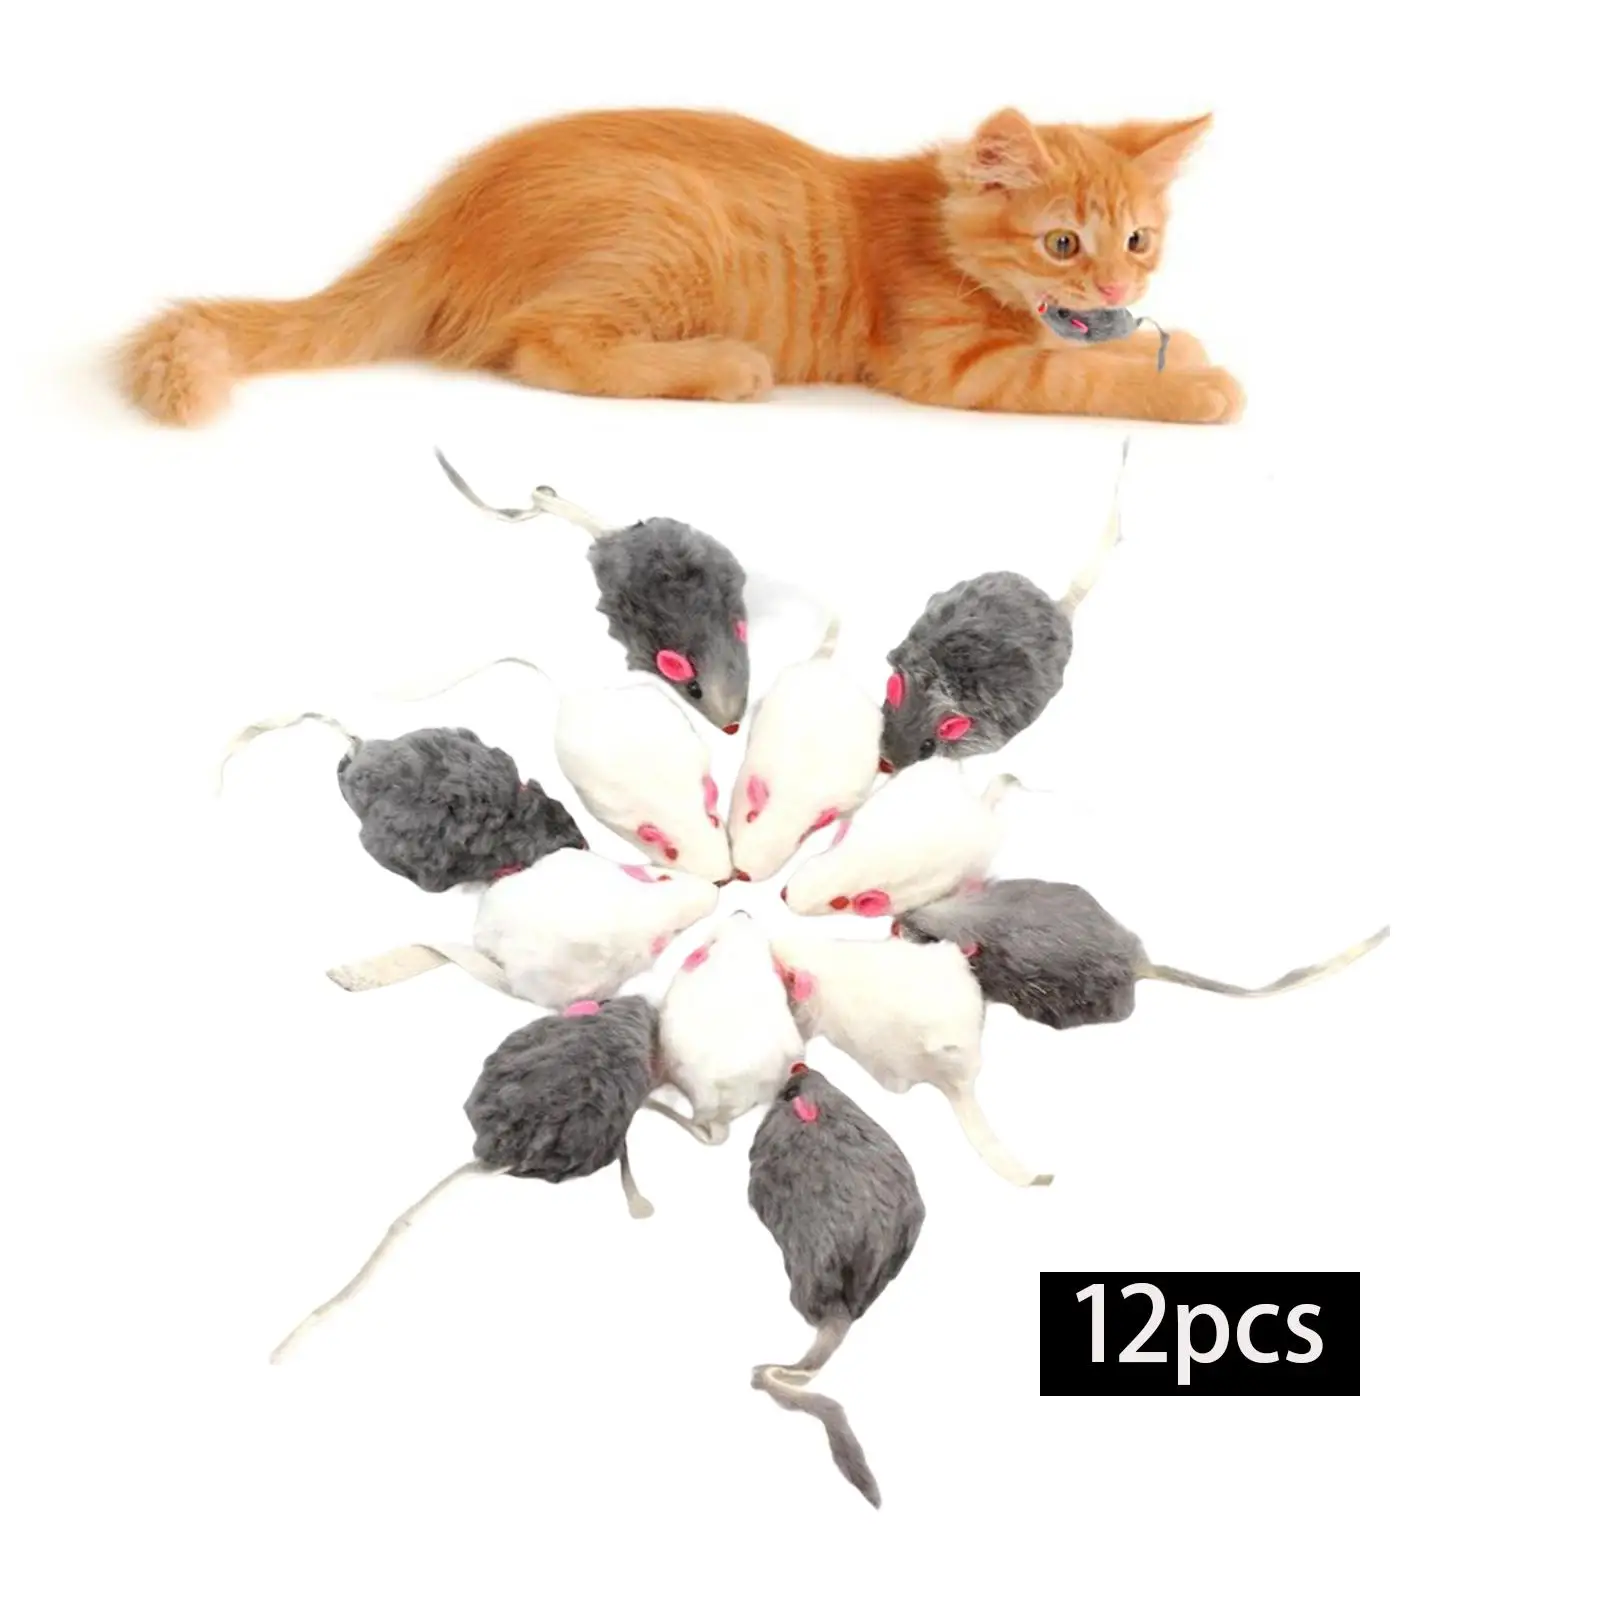 12 Pieces Cat Mice Toy Kitty Chew Toy Soft Stuffed Animals Teaser for Cats and Kitten Training